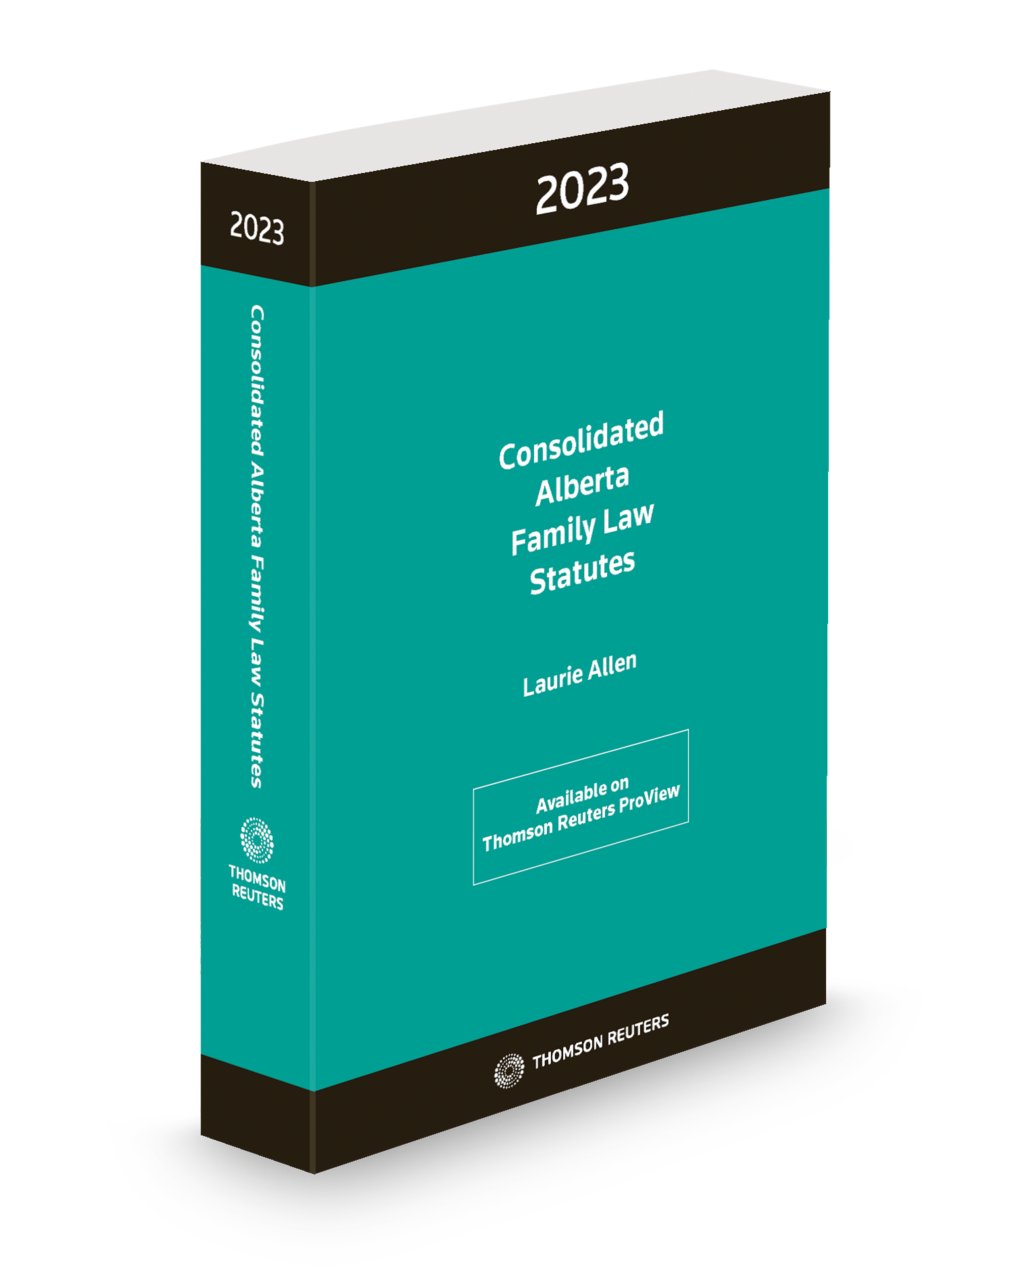 Image of the front cover of Consolidated Alberta Family Law Statutes 2023.